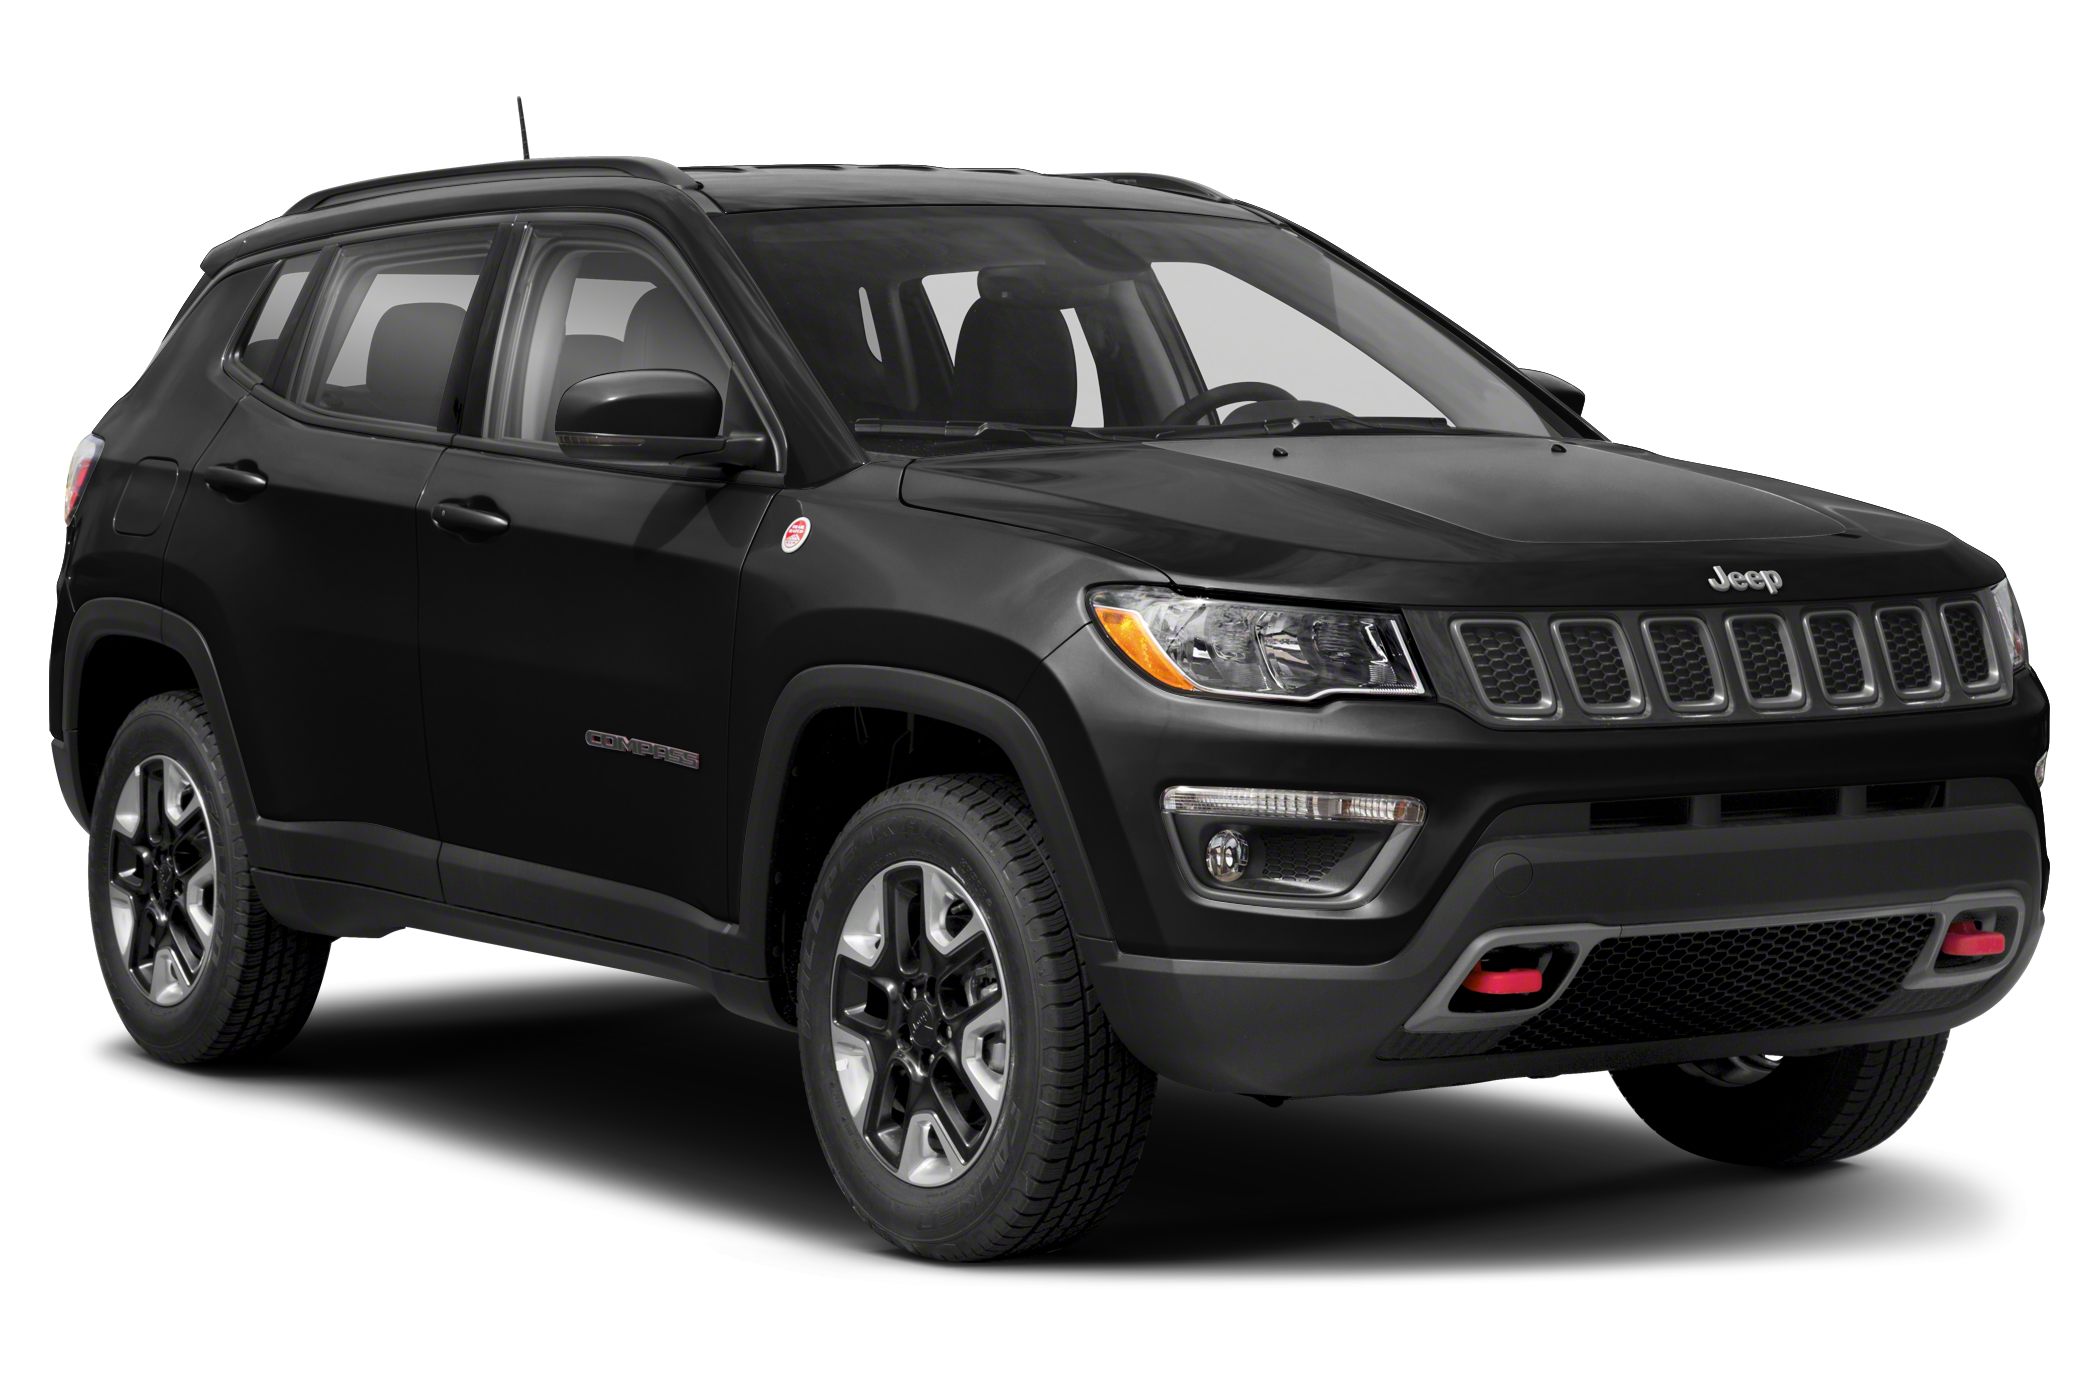 Jeep Compass Trailhawk 4dr 4x4 Pricing And Options